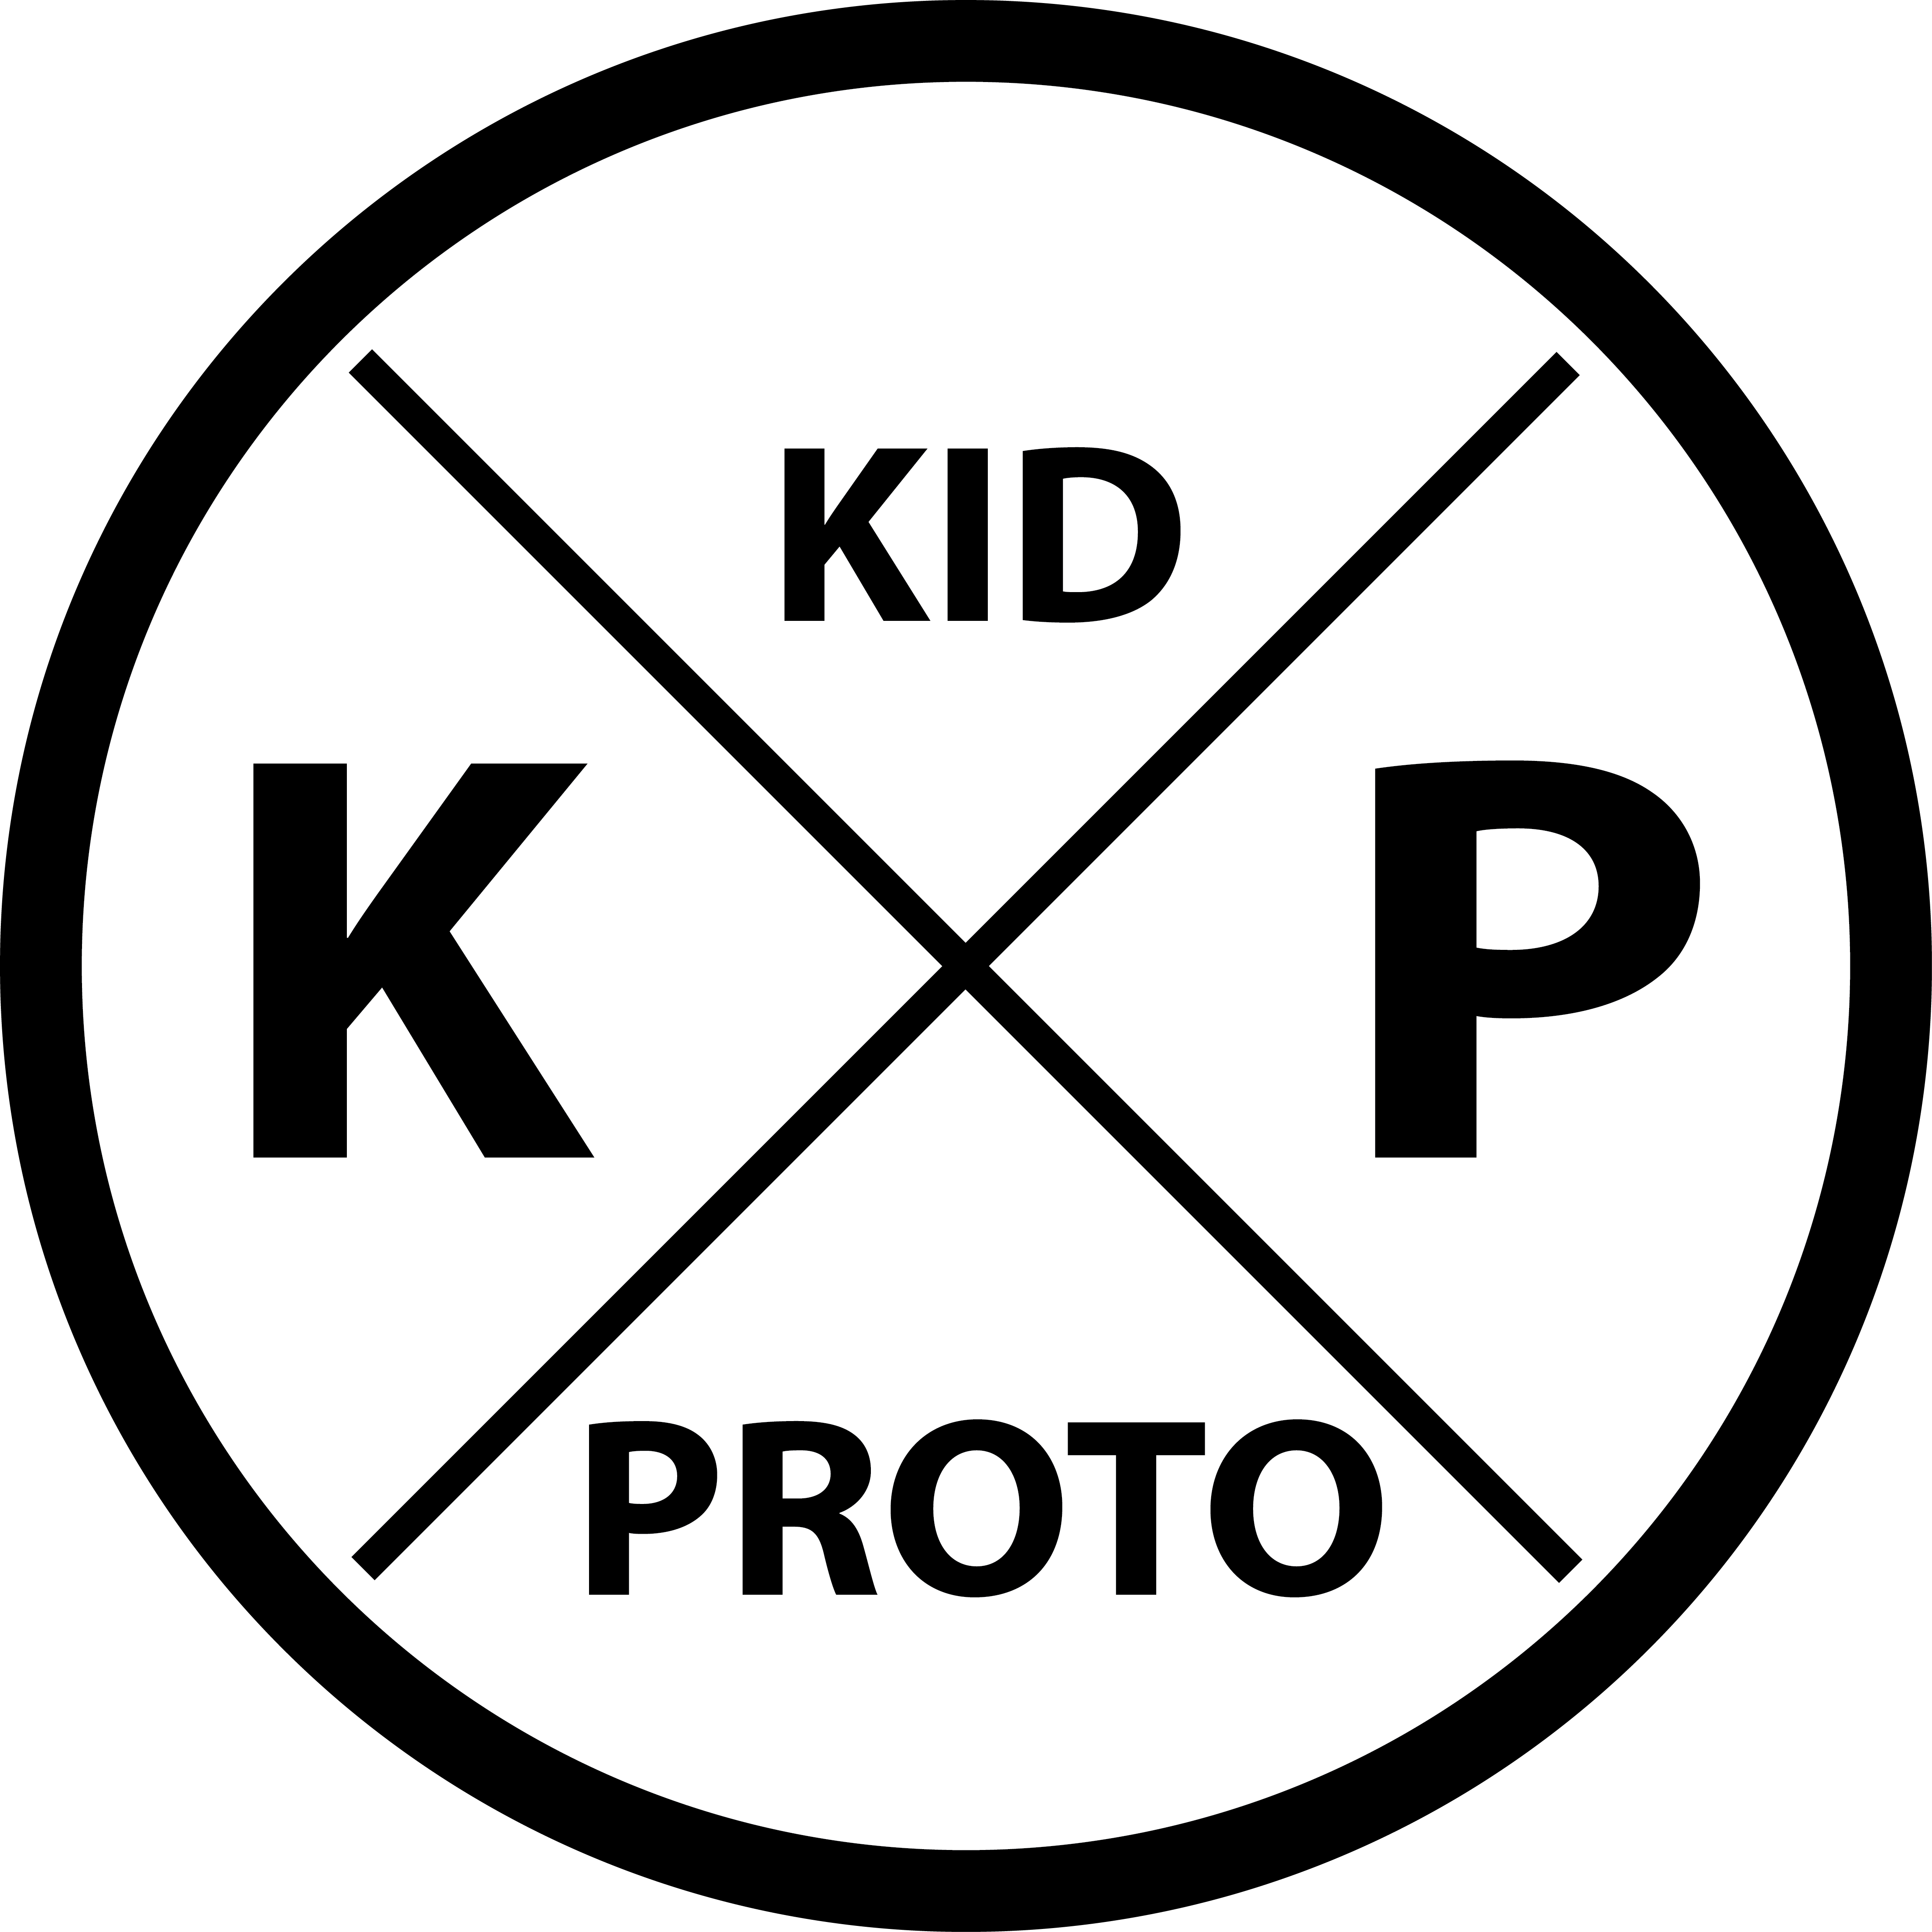 Kid Proto - Official Website